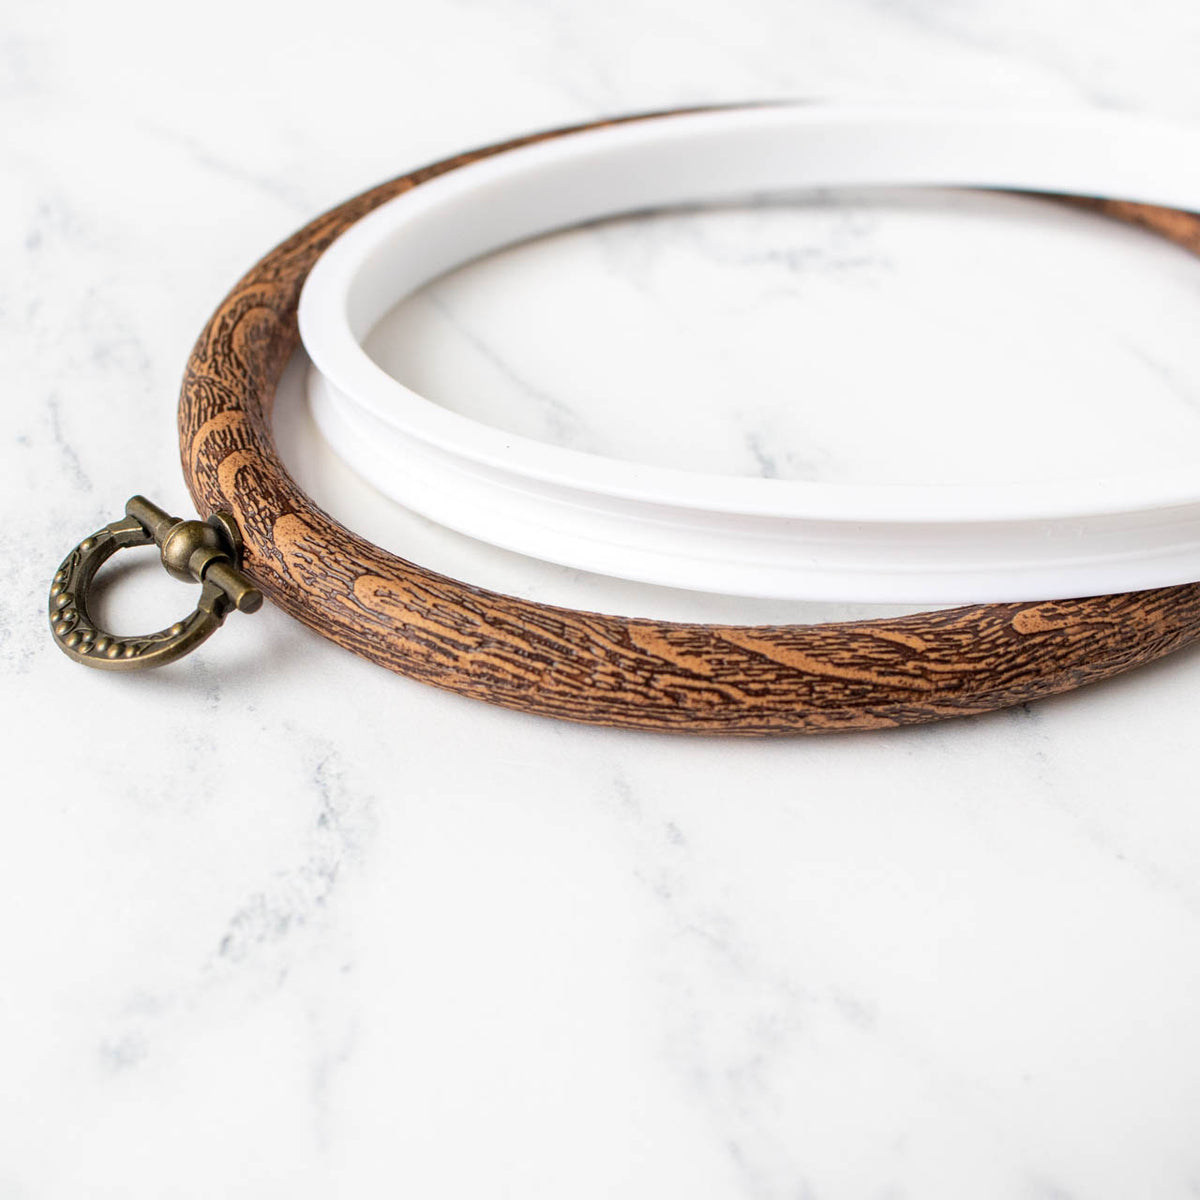 Faux Wood Flexible Embroidery Hoop - Oval